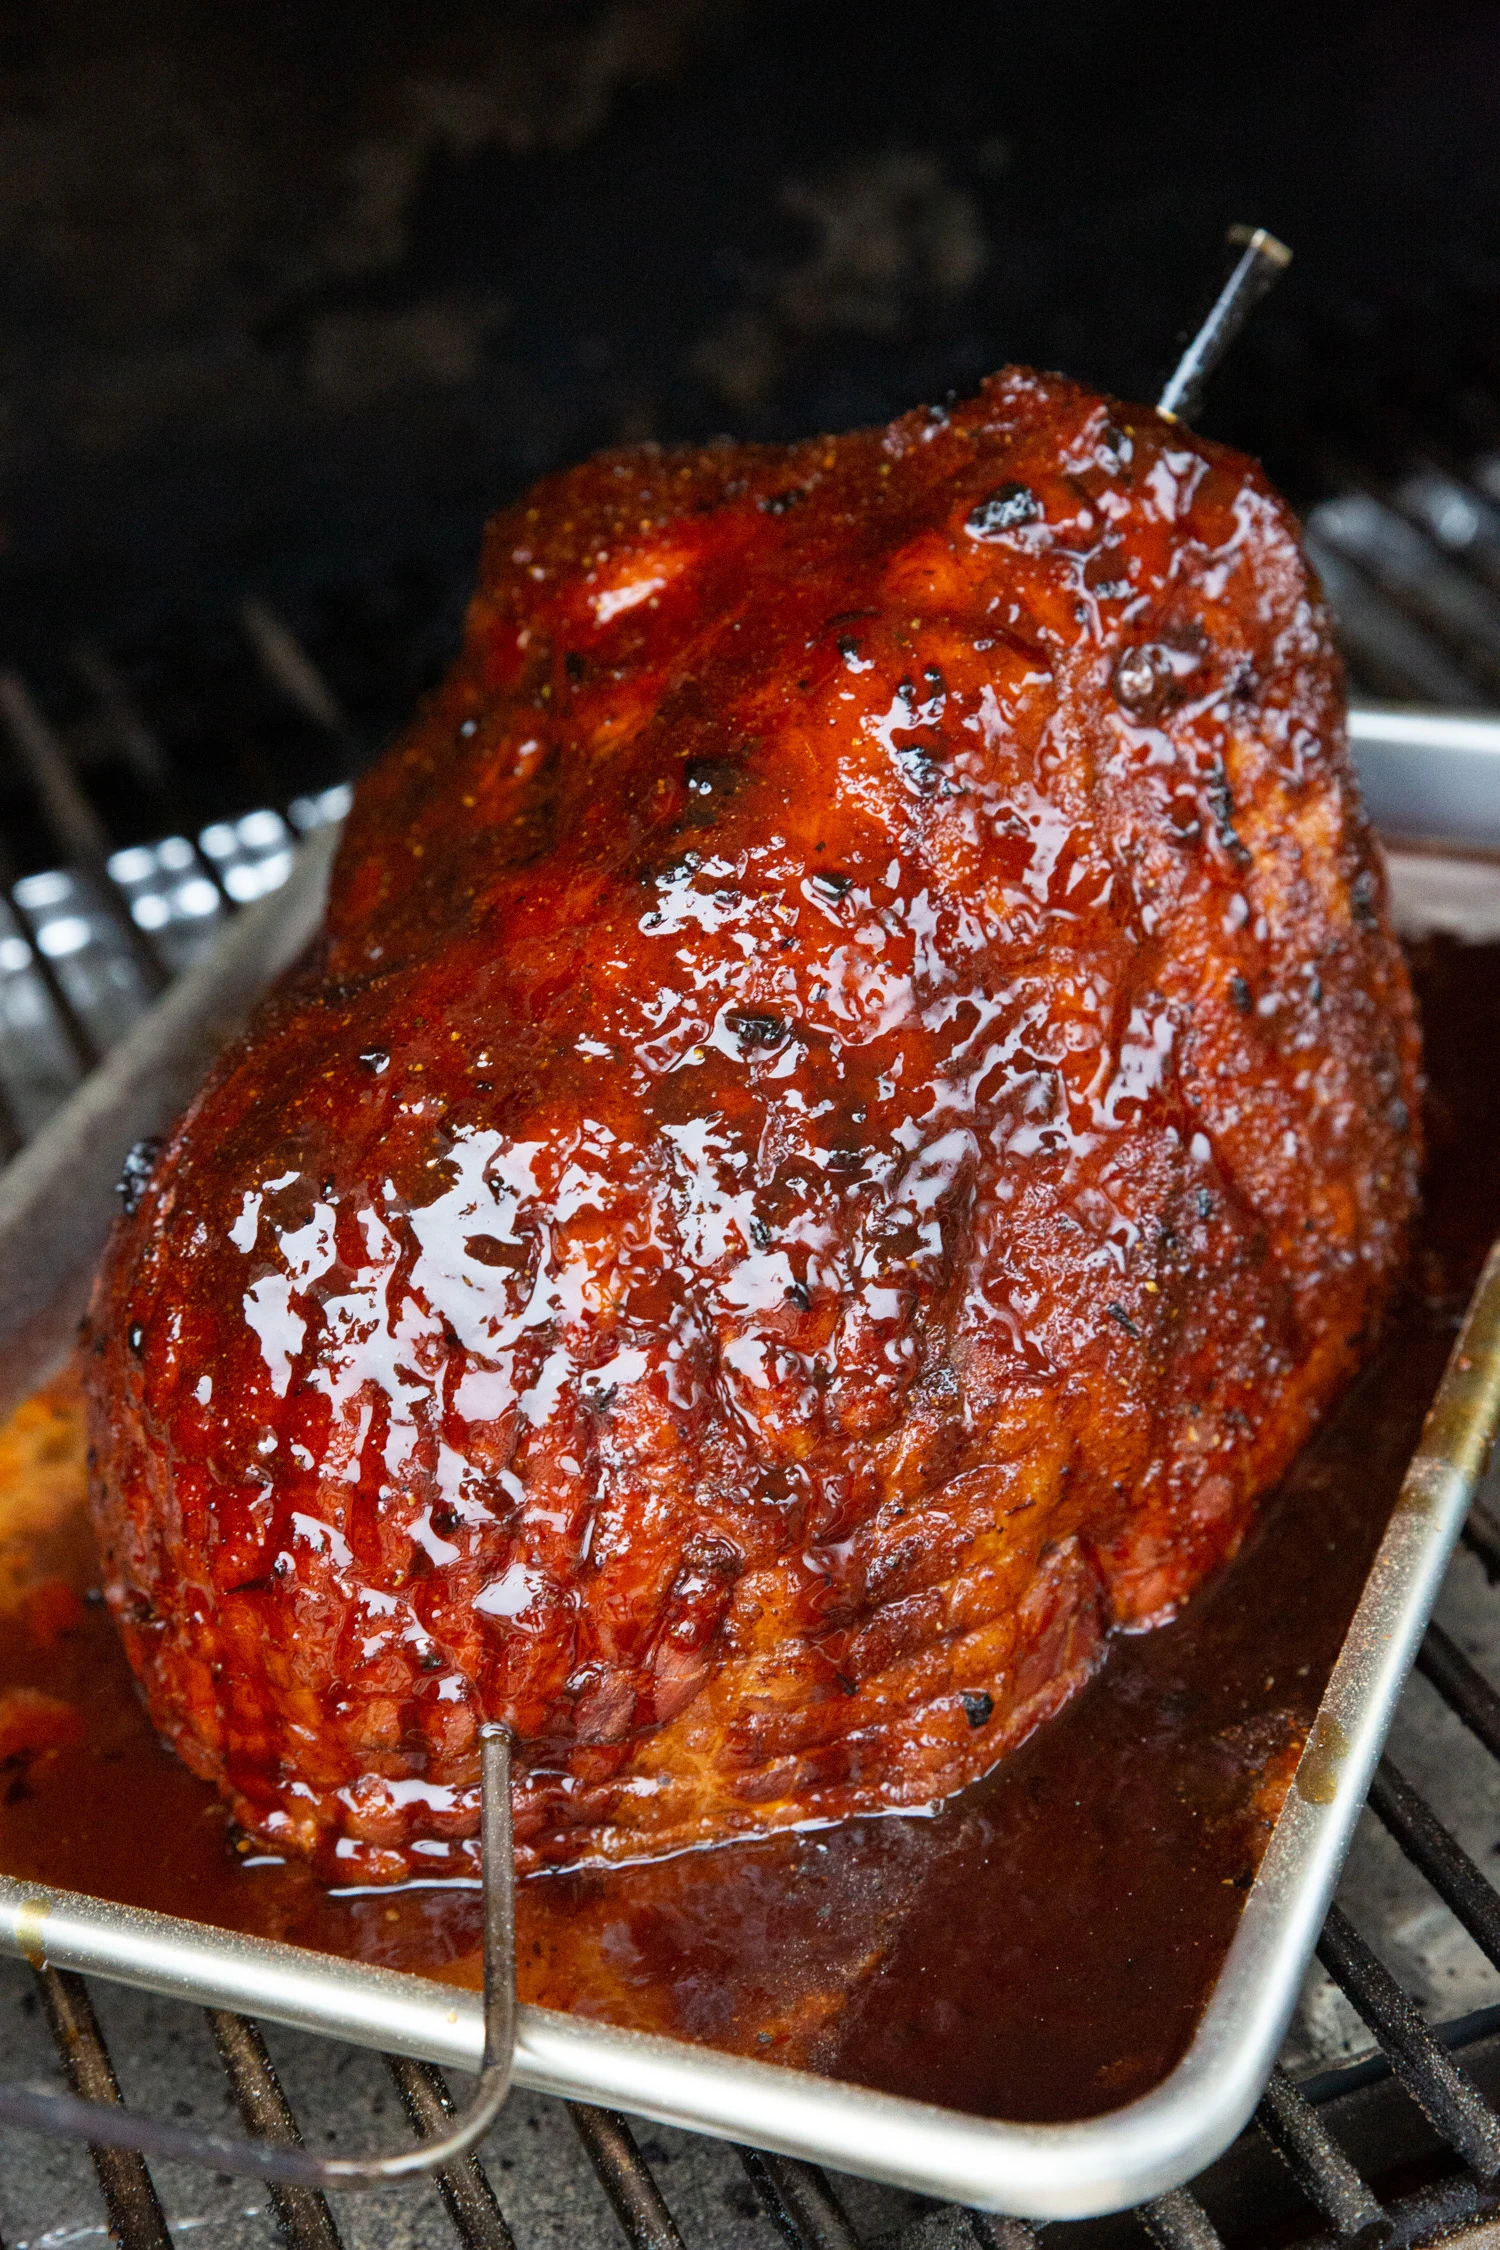 A red glazed and smoked ham on a barbecue.